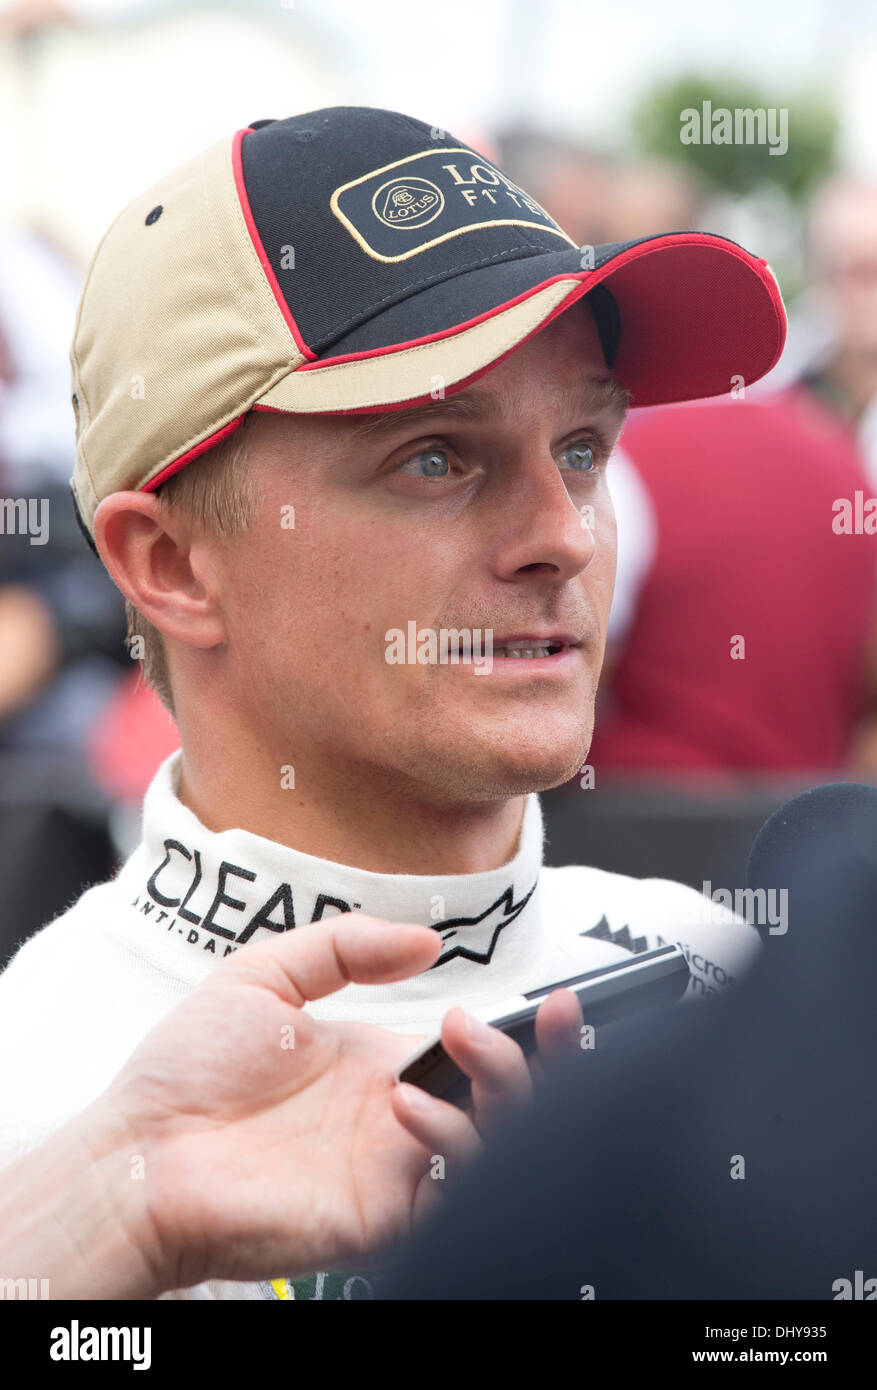 F1 race car driver Heikki Kovalainen talks to the press after qualifying for the Formula One United States Grand Prix at the Circuit of the Americas track outside of Austin Texas. Stock Photo